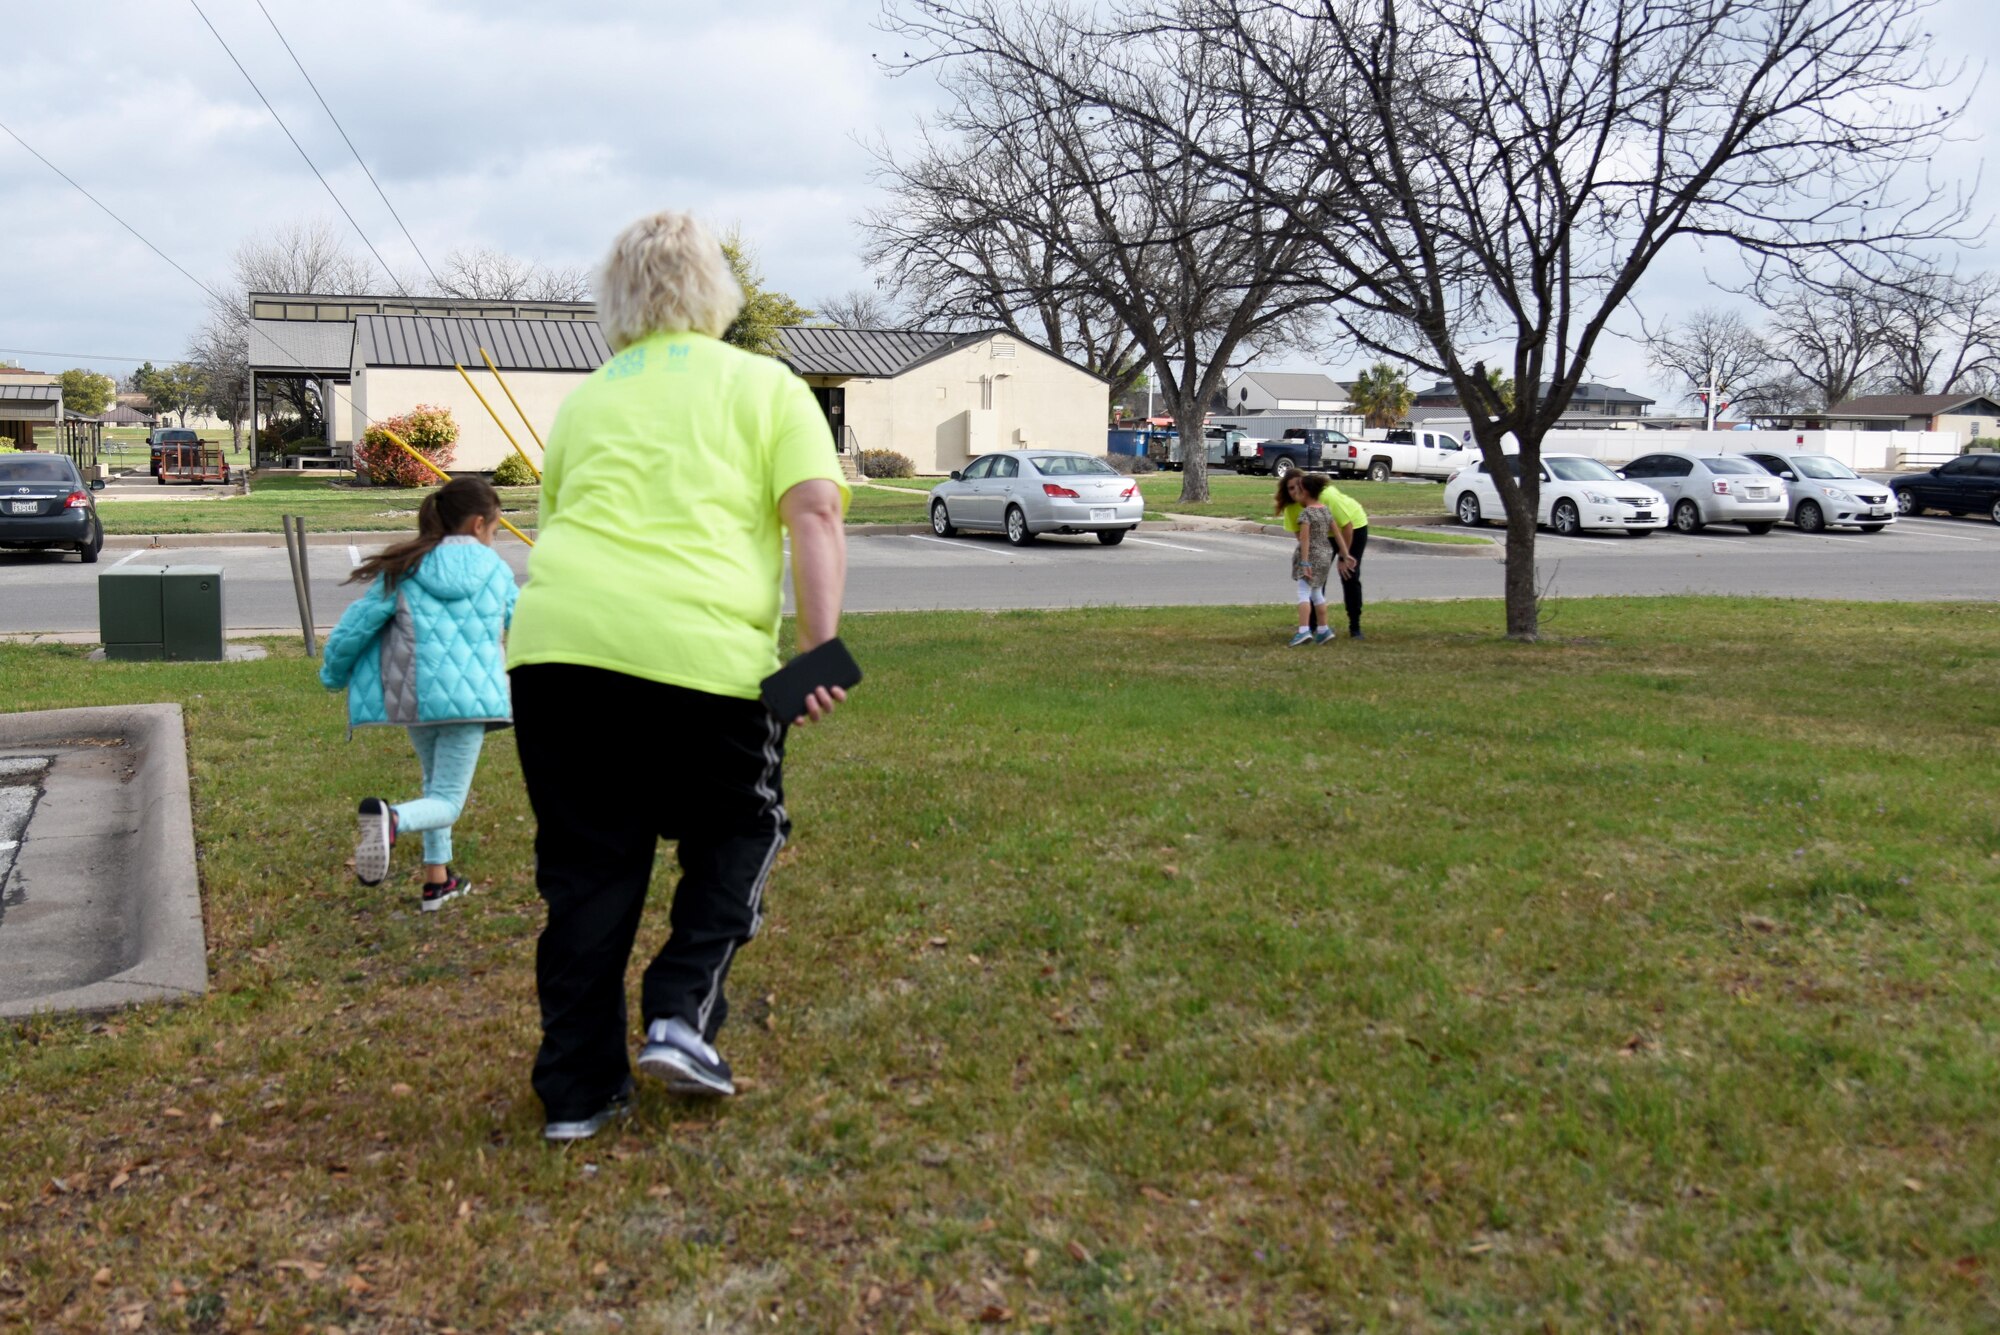 Catie Widenhofer, radKIDs instructor, chases after a child during a radKIDS class at the Youth Center on Goodfellow Air Force Base, Texas, March 16, 2017. Widenhofer teaches the radKIDs class to run to someone they trust when approached by strangers. (U.S. Air Force photos by Staff Sgt. Joshua Edwards/Released)